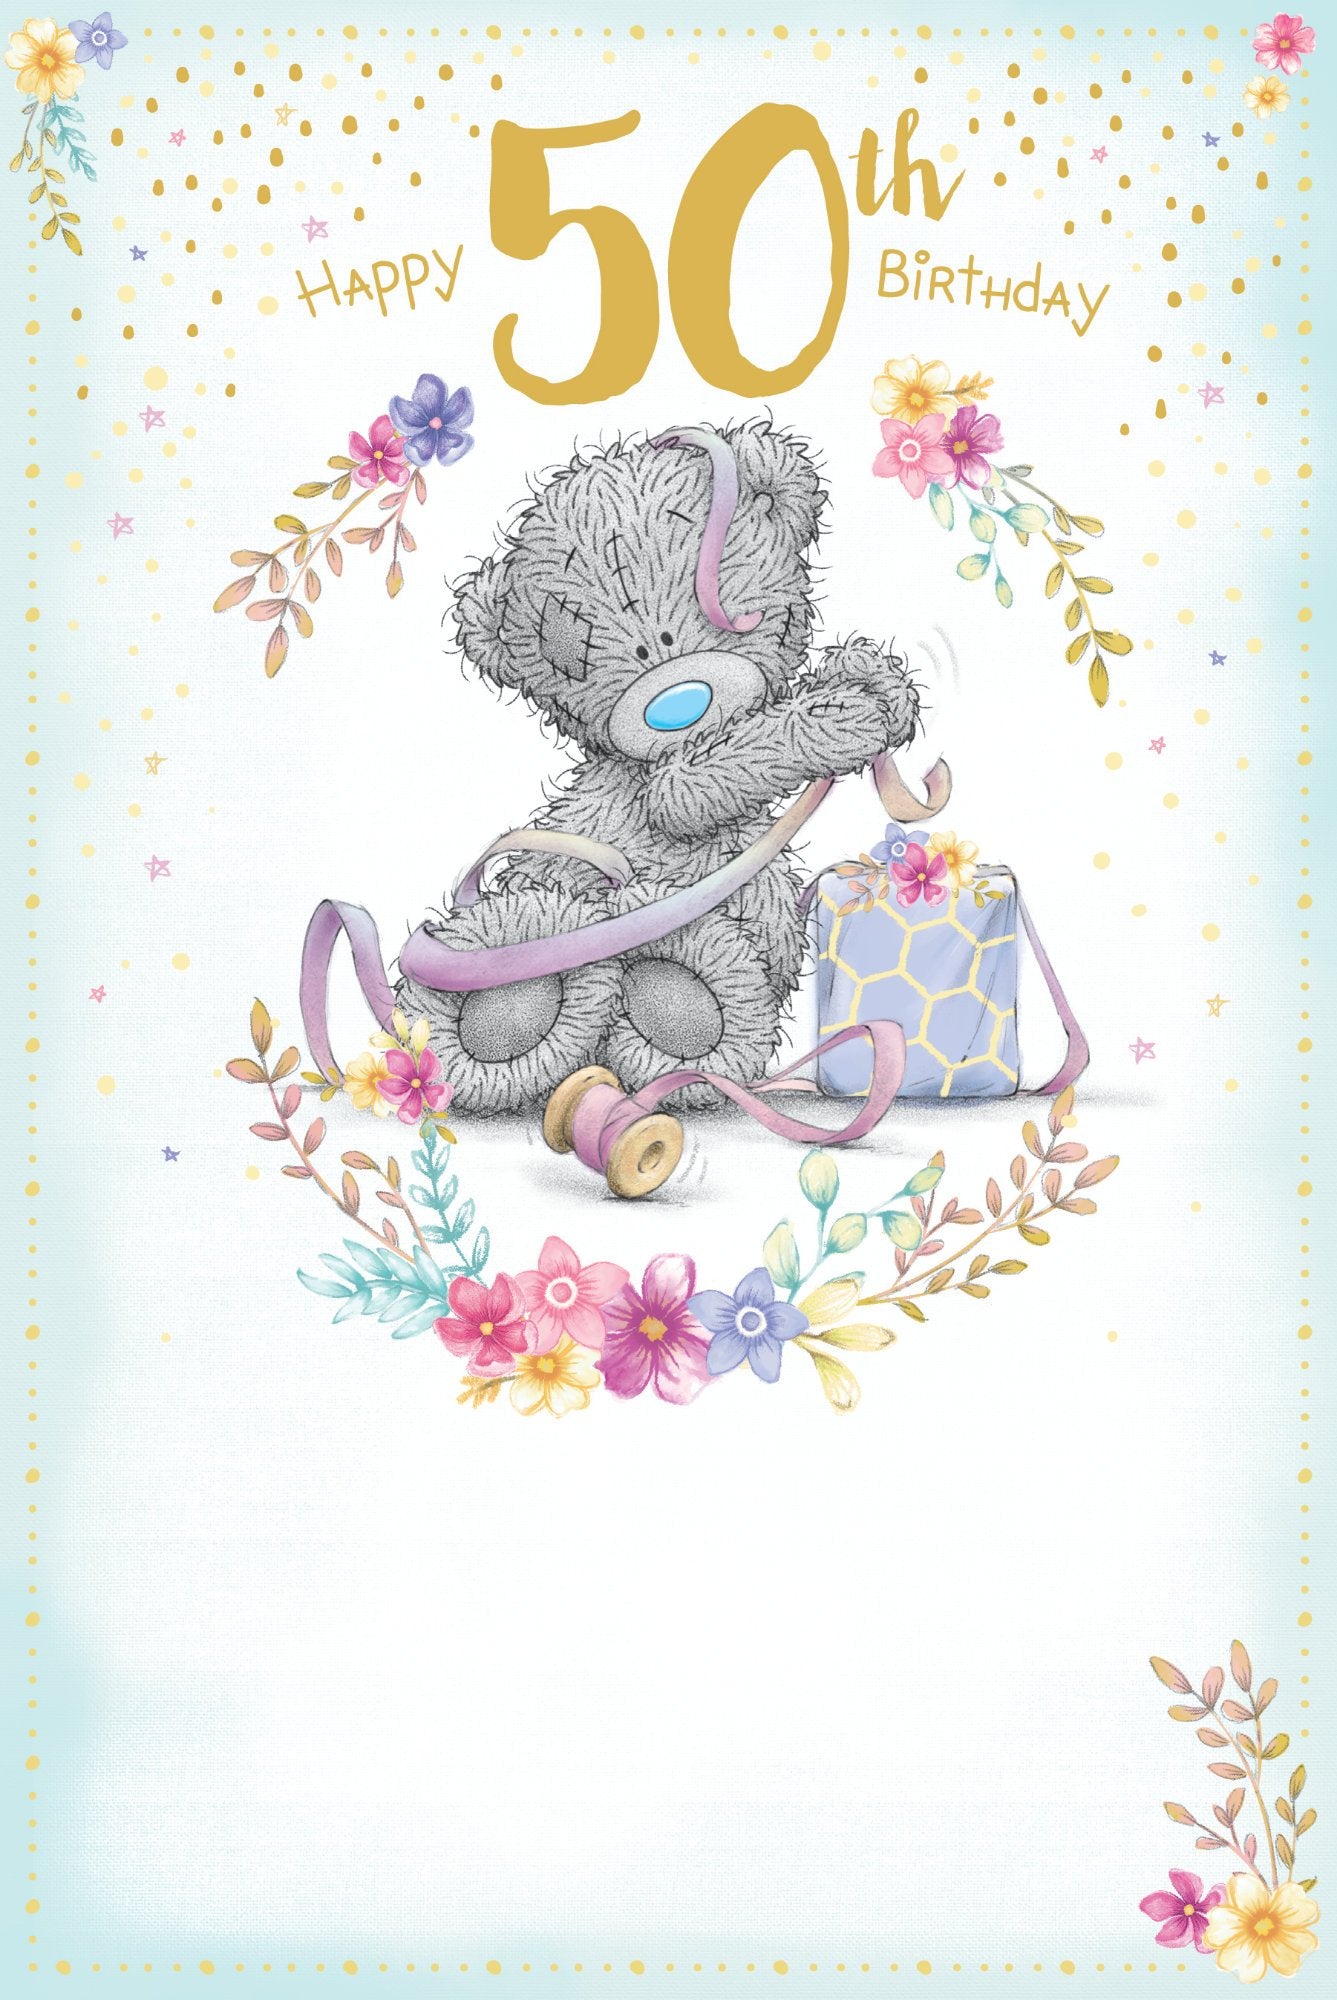 Photograph of 50th Birthday Teddy Bag Greetings Card at Nicole's Shop